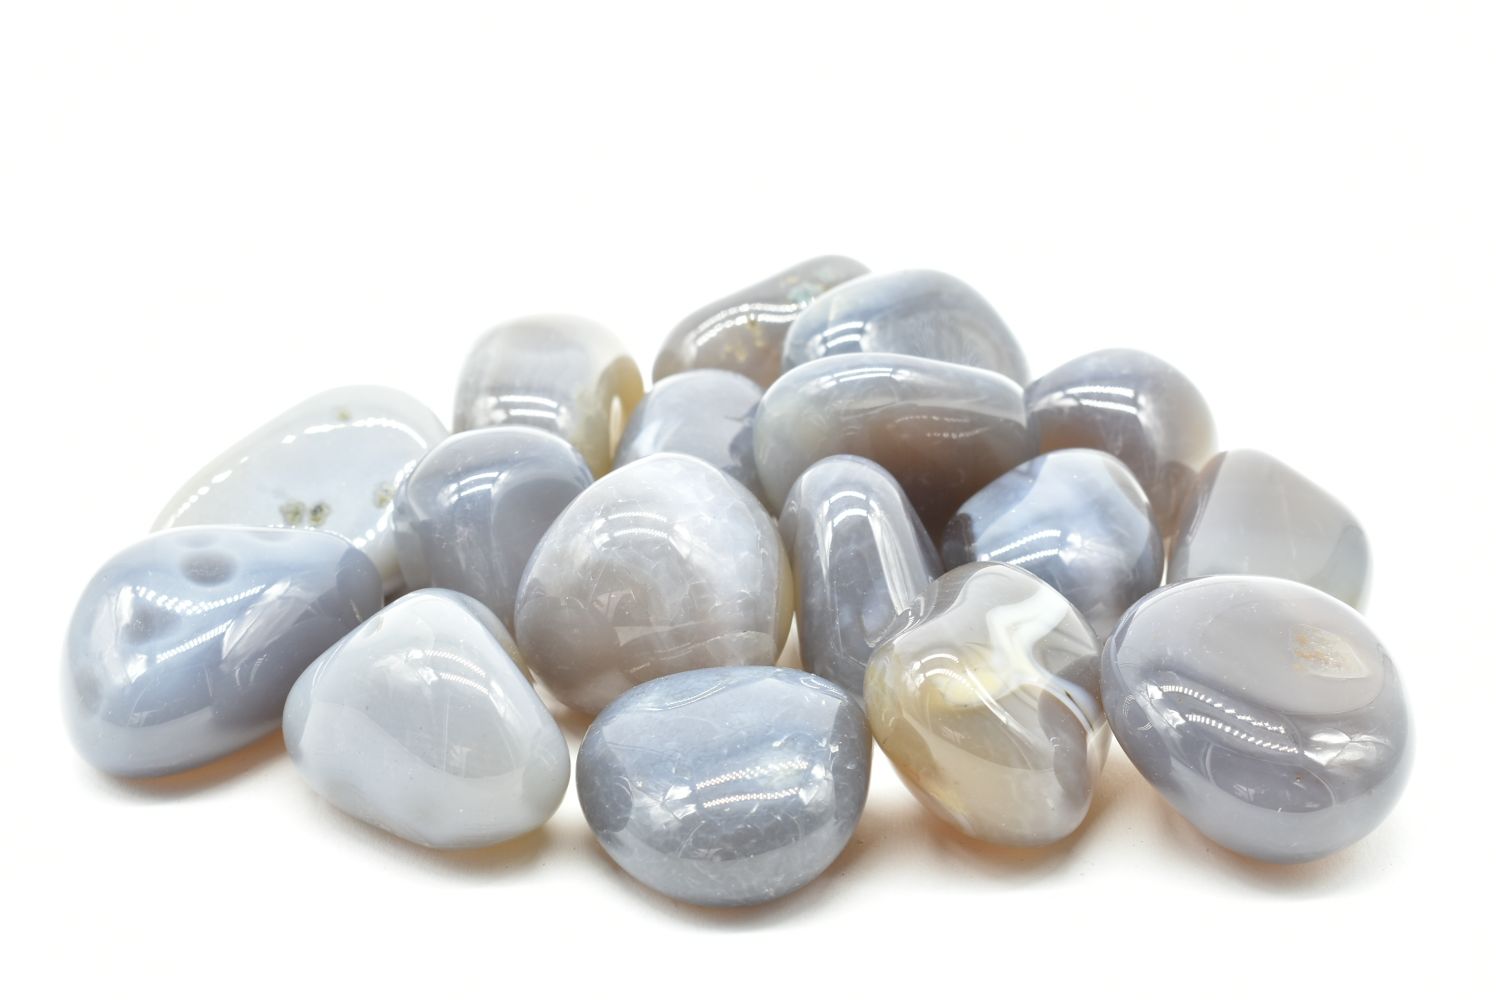 Tumbled Gray Agate from Brazil